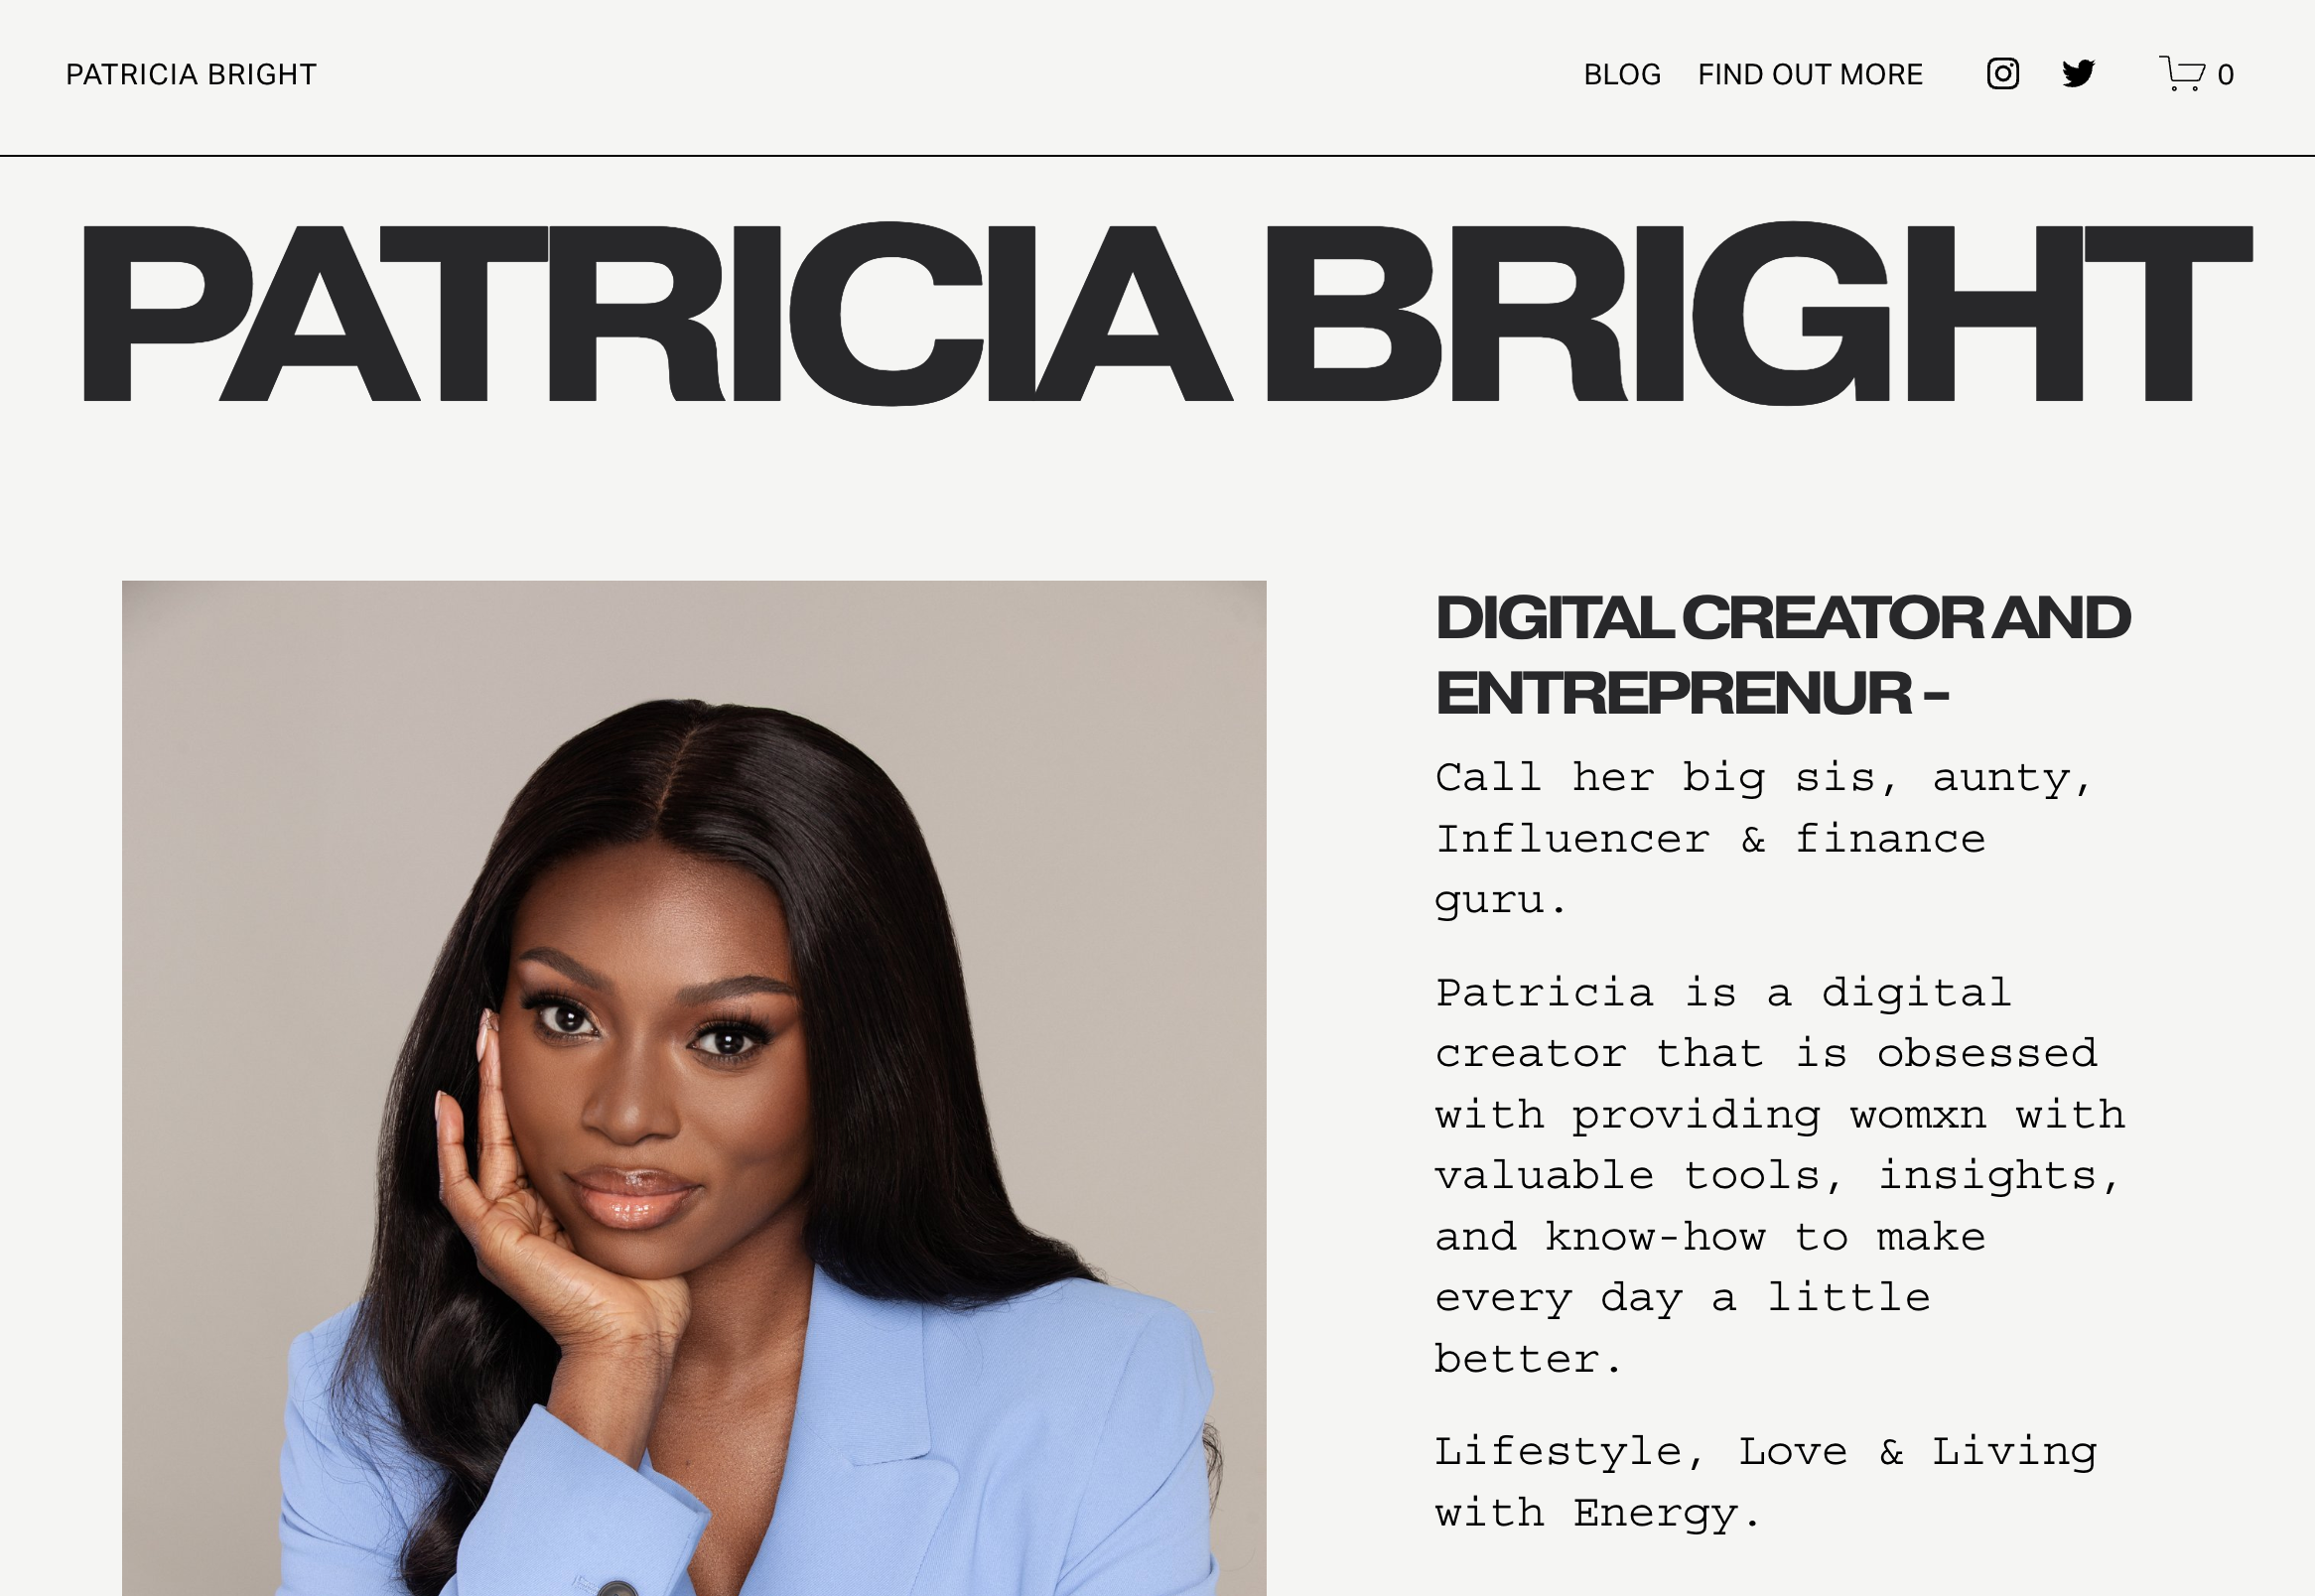 A webpage on Patricia Bright's professional website